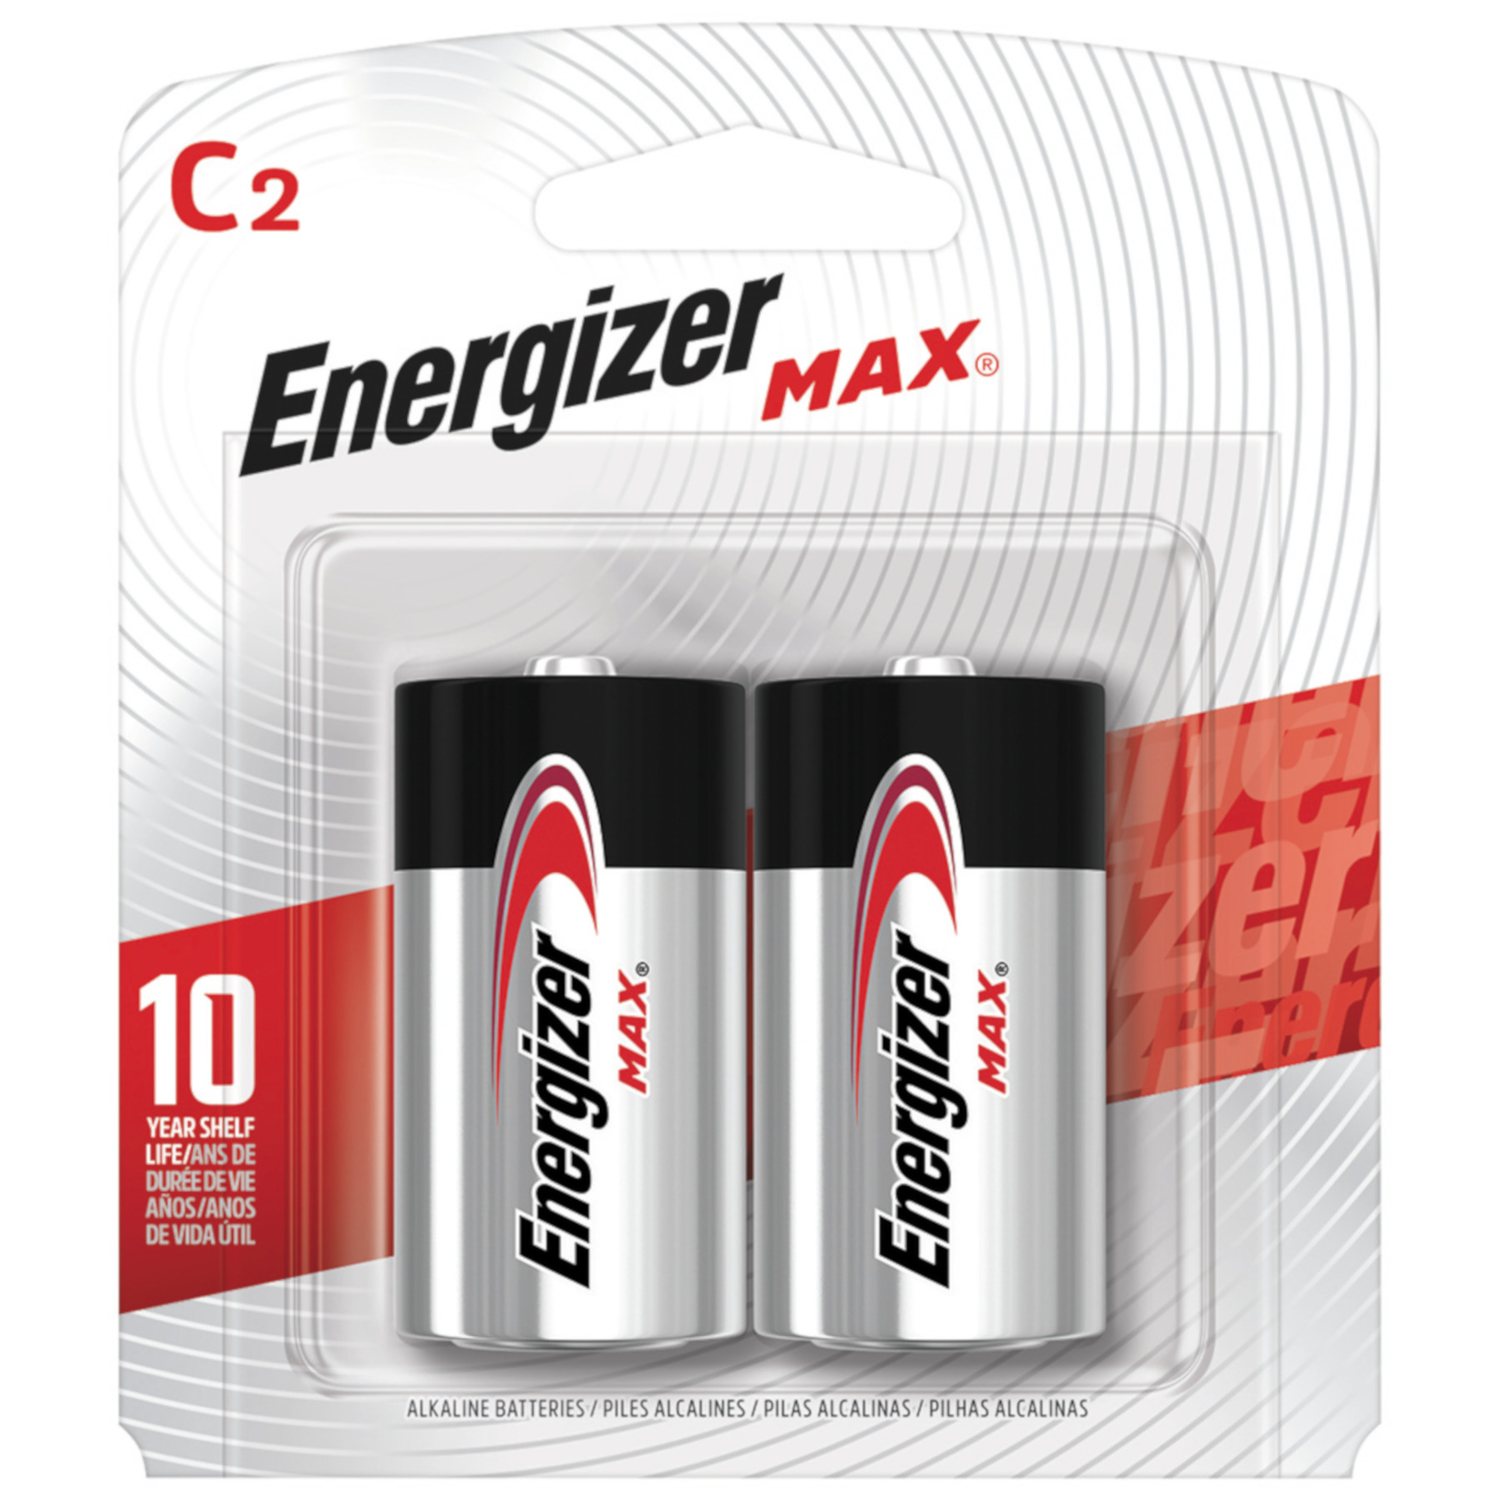 Photos - Household Switch Energizer Max C Alkaline Batteries 2 pk Carded E93BP-2 